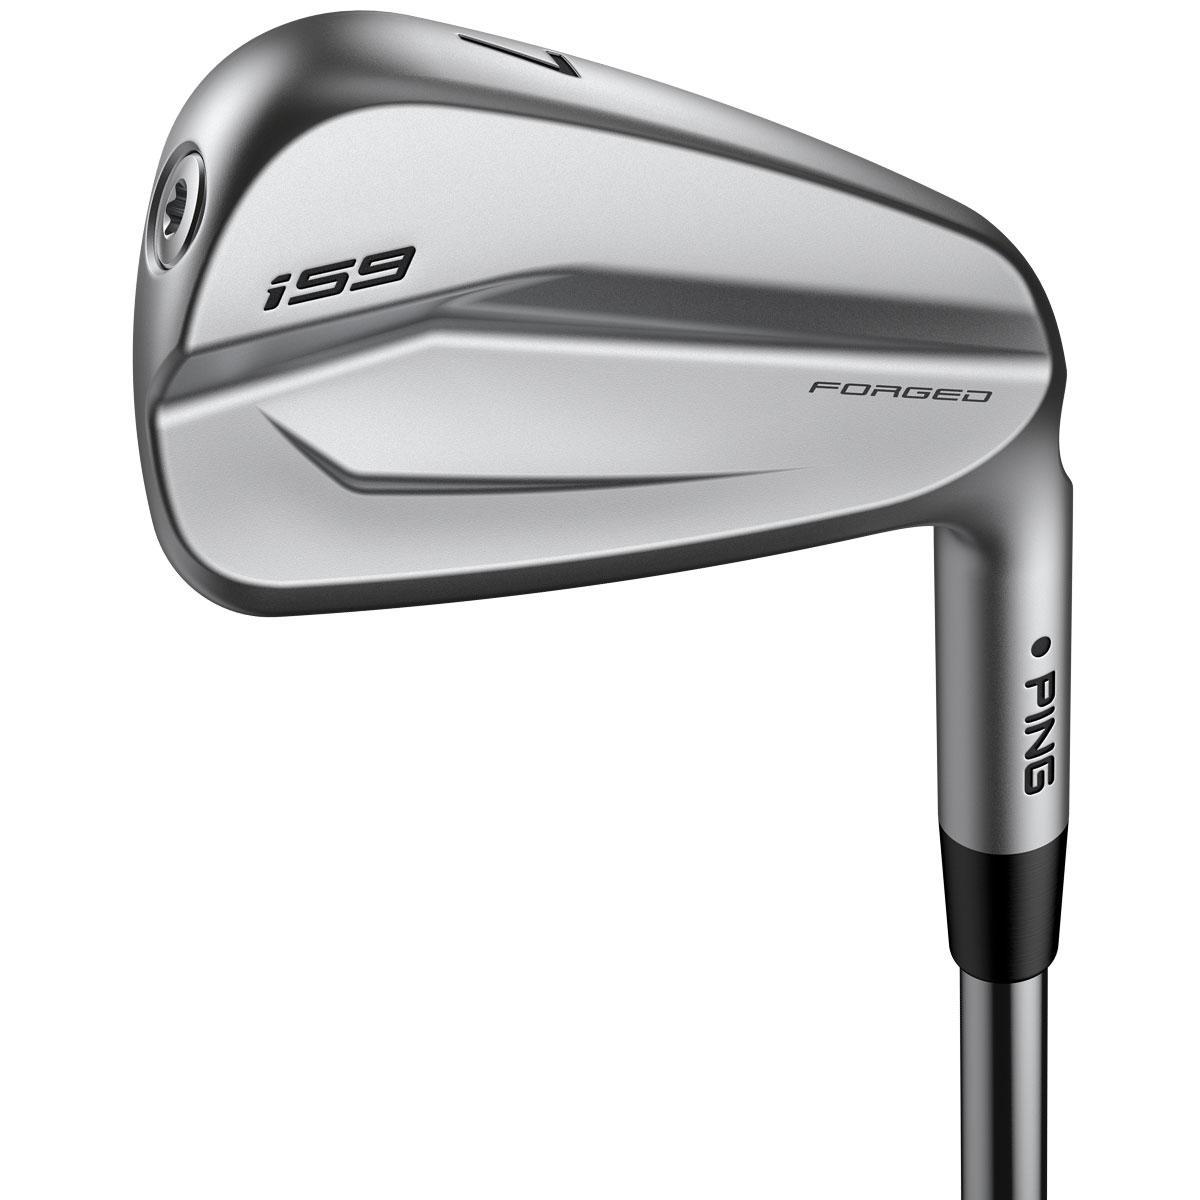 PING i59 アイアンセット 6本［N.S.PRO MODUS3 TOUR 105］